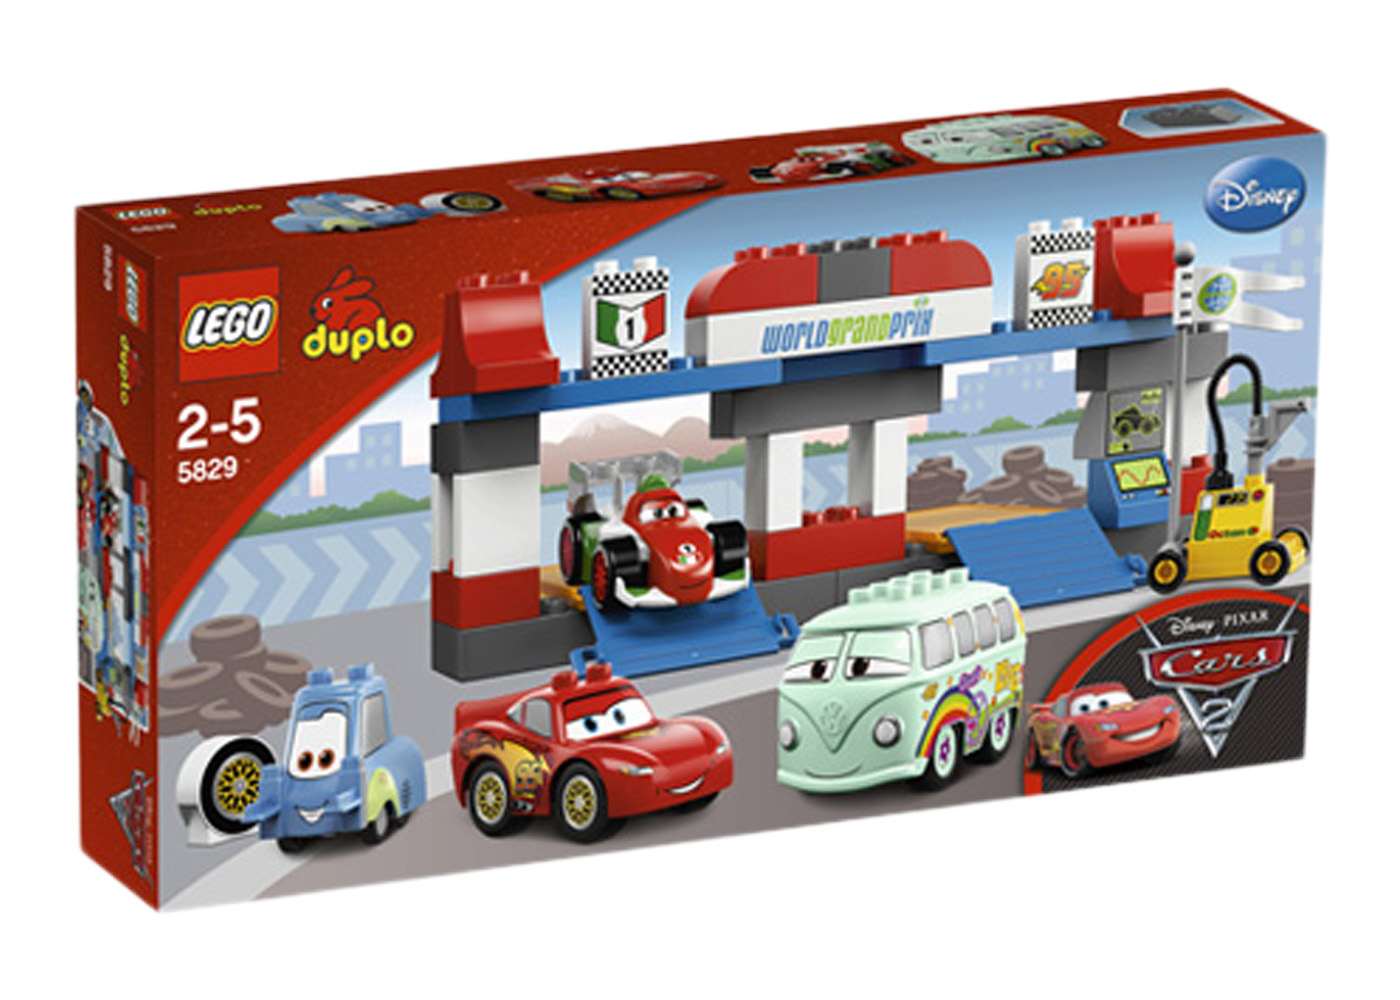 LEGO Duplo The Pit Stop Set 5829 - SS15 - US